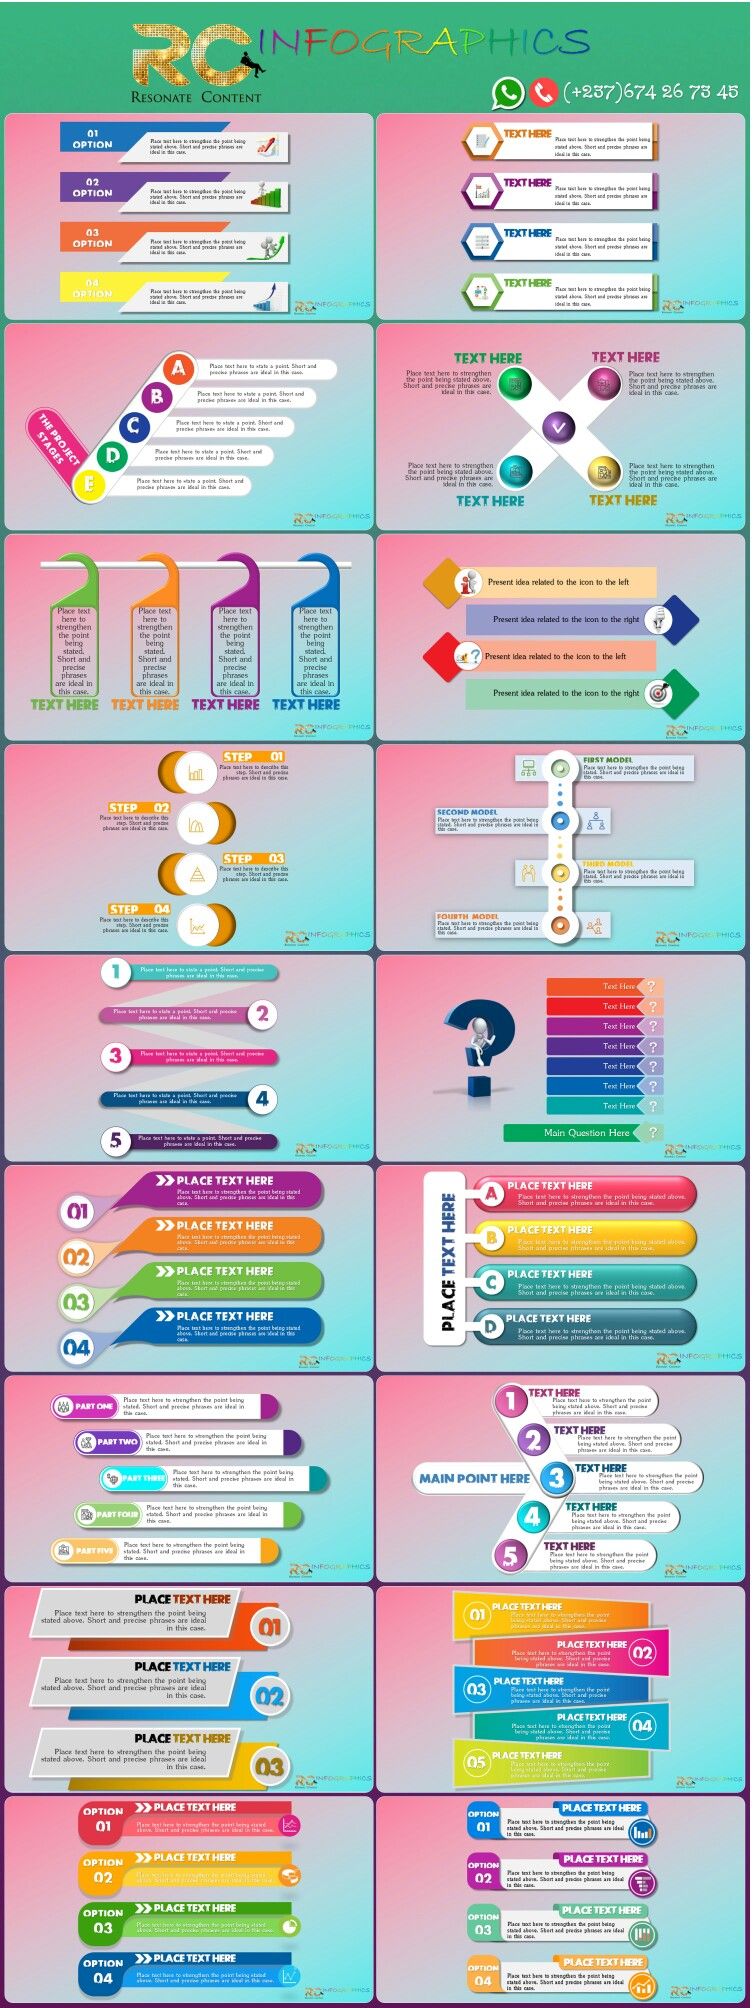 How to Create an Awesome Infographic - Infographics | Graphs.net